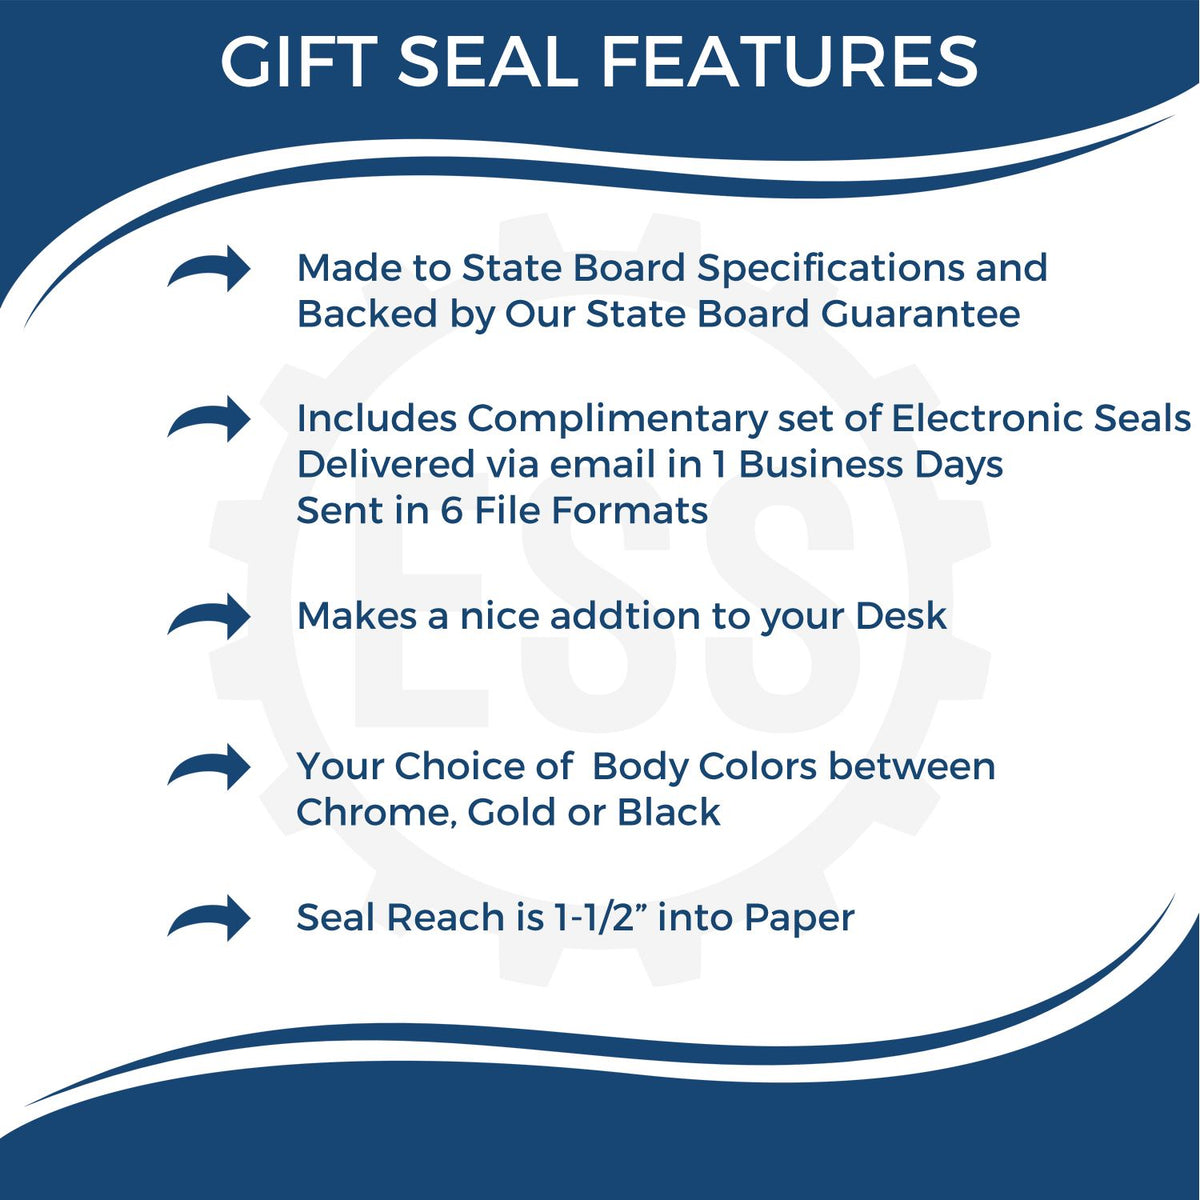 A picture of an infographic highlighting the selling points for the Gift Idaho Geologist Seal